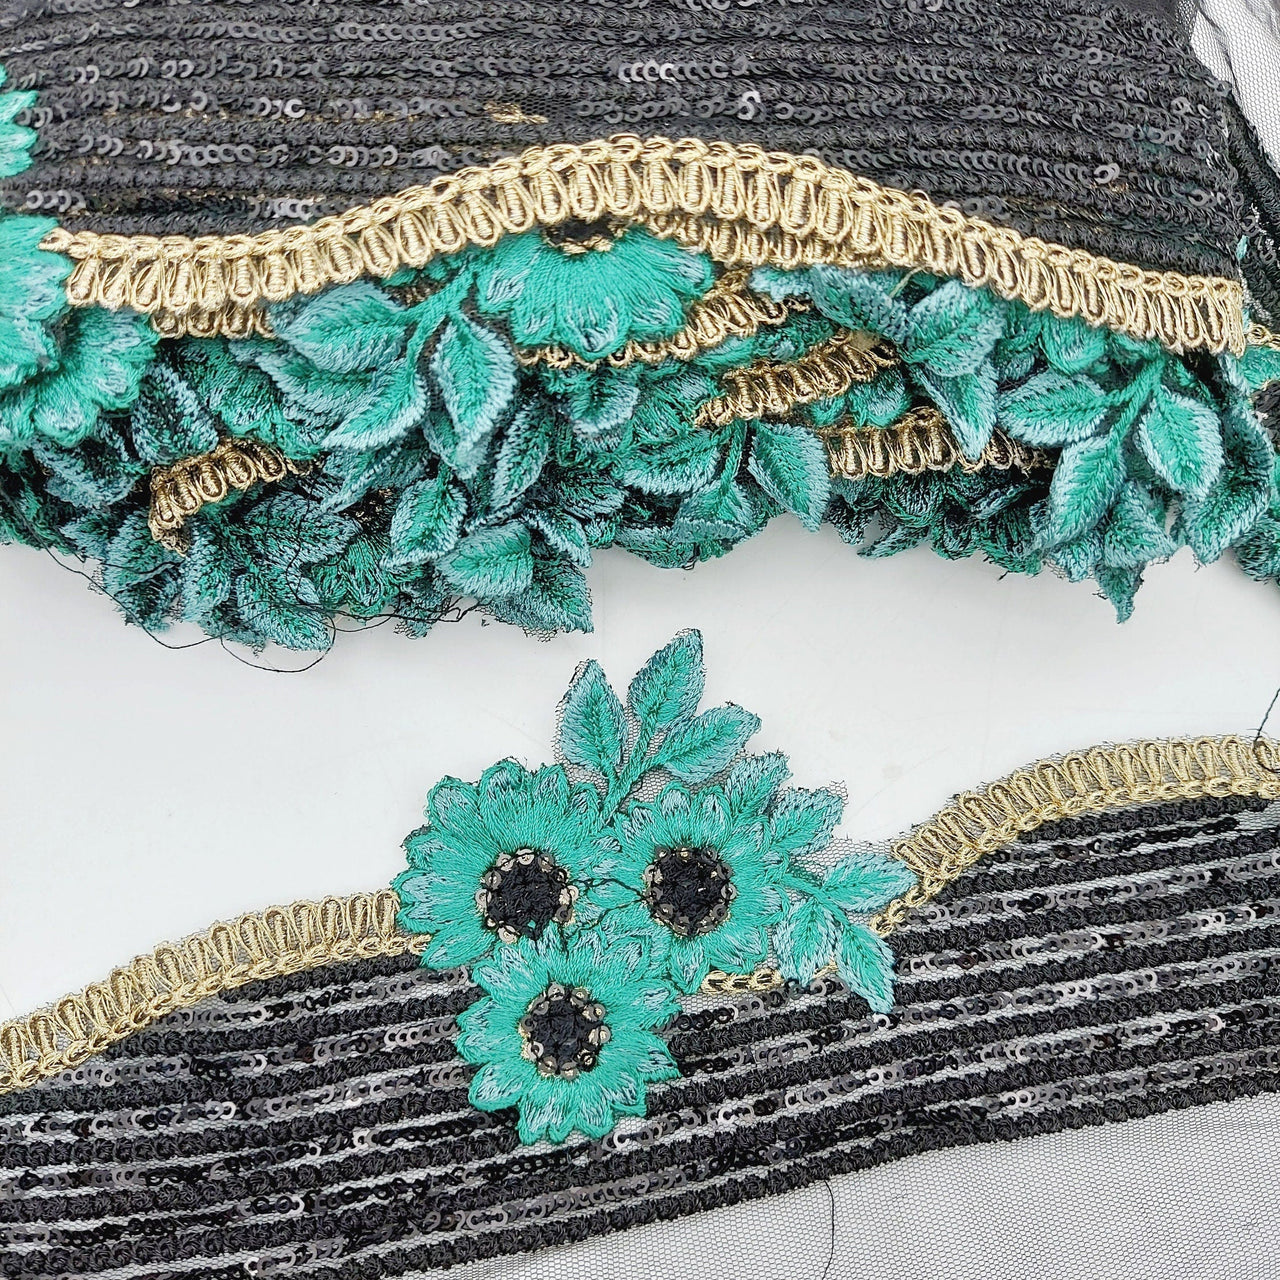 Black Net Scallop Cutwork Lace Trim with Blue Floral Embroidery With Sequins, Sari Border, Embroidered Trim